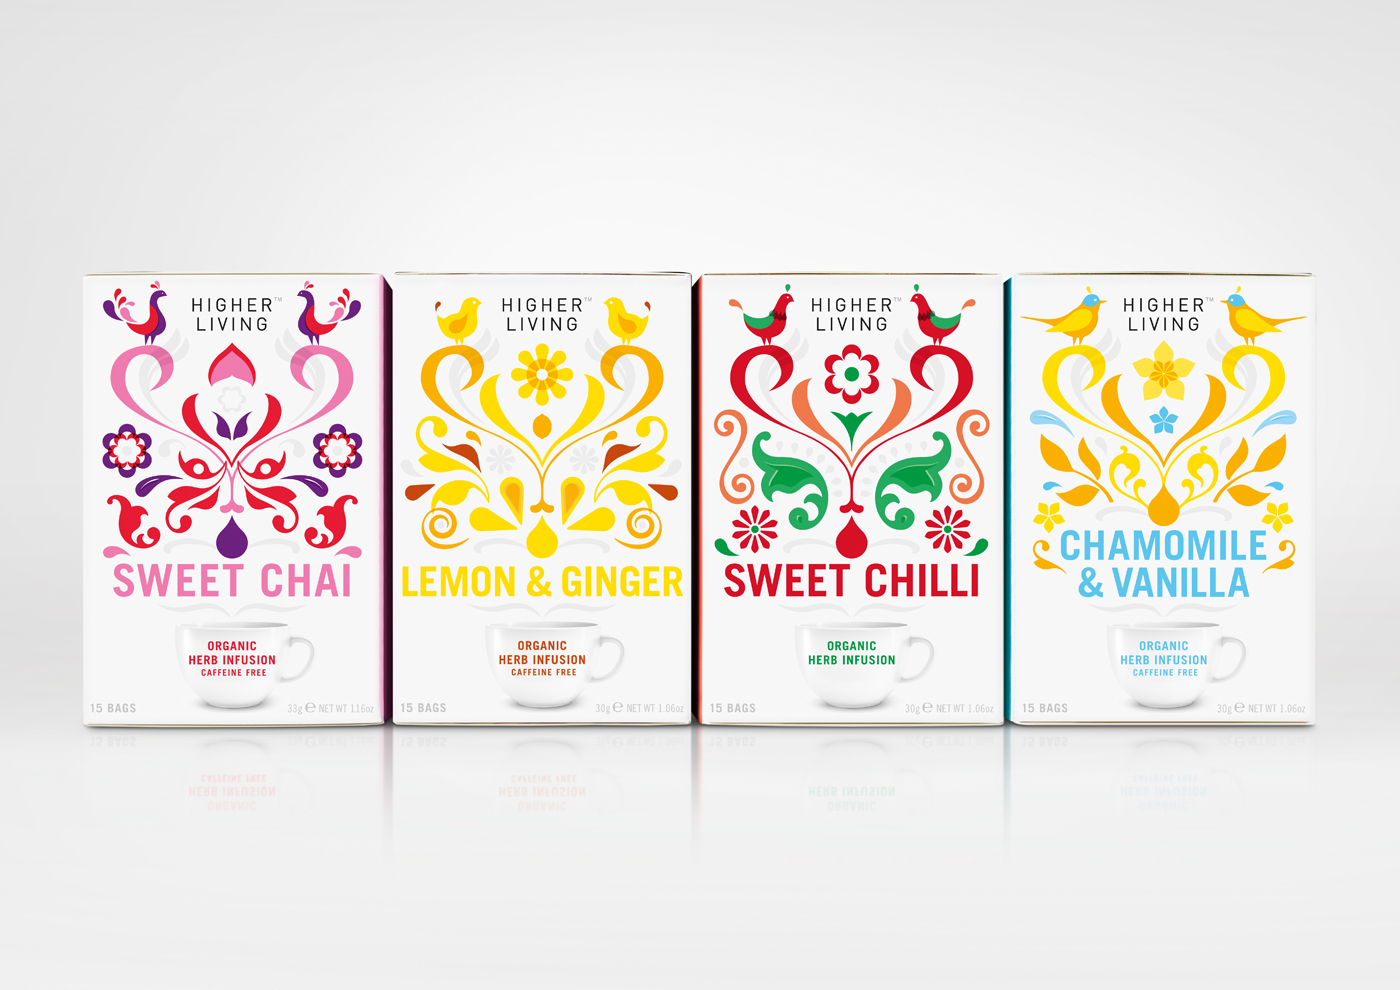 Tea packaging with illustrative detail designed by B&B Studio for UK herbal tea company brand Higher Living